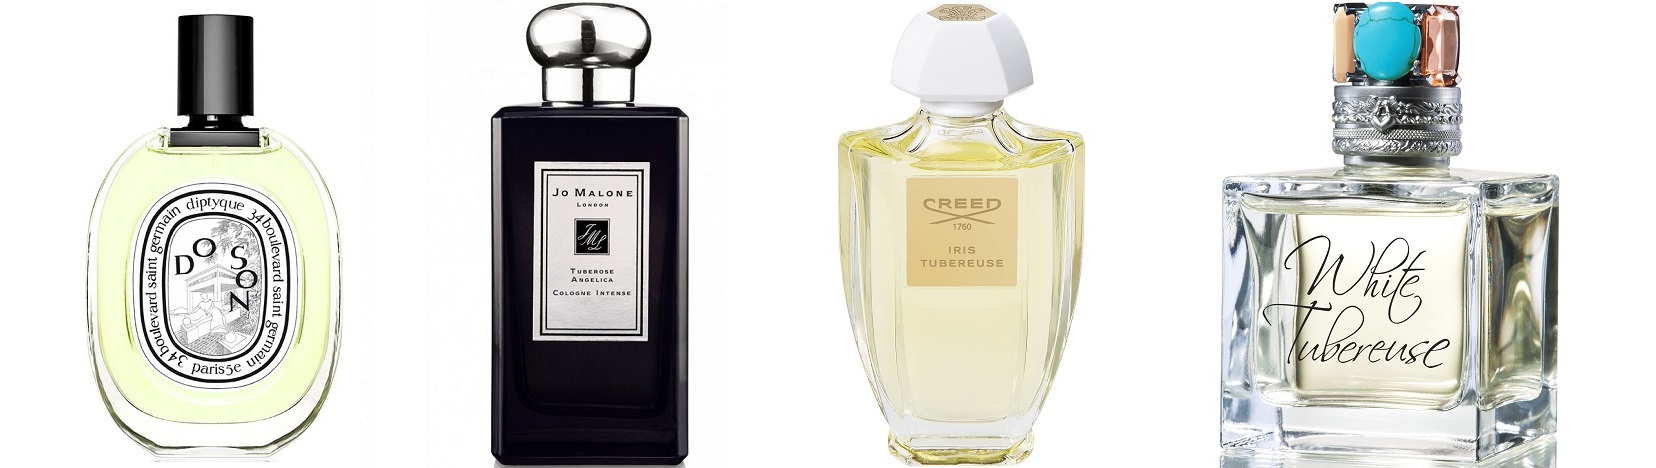 tubereuse_diptyque_creed_reminiscence_jo malone